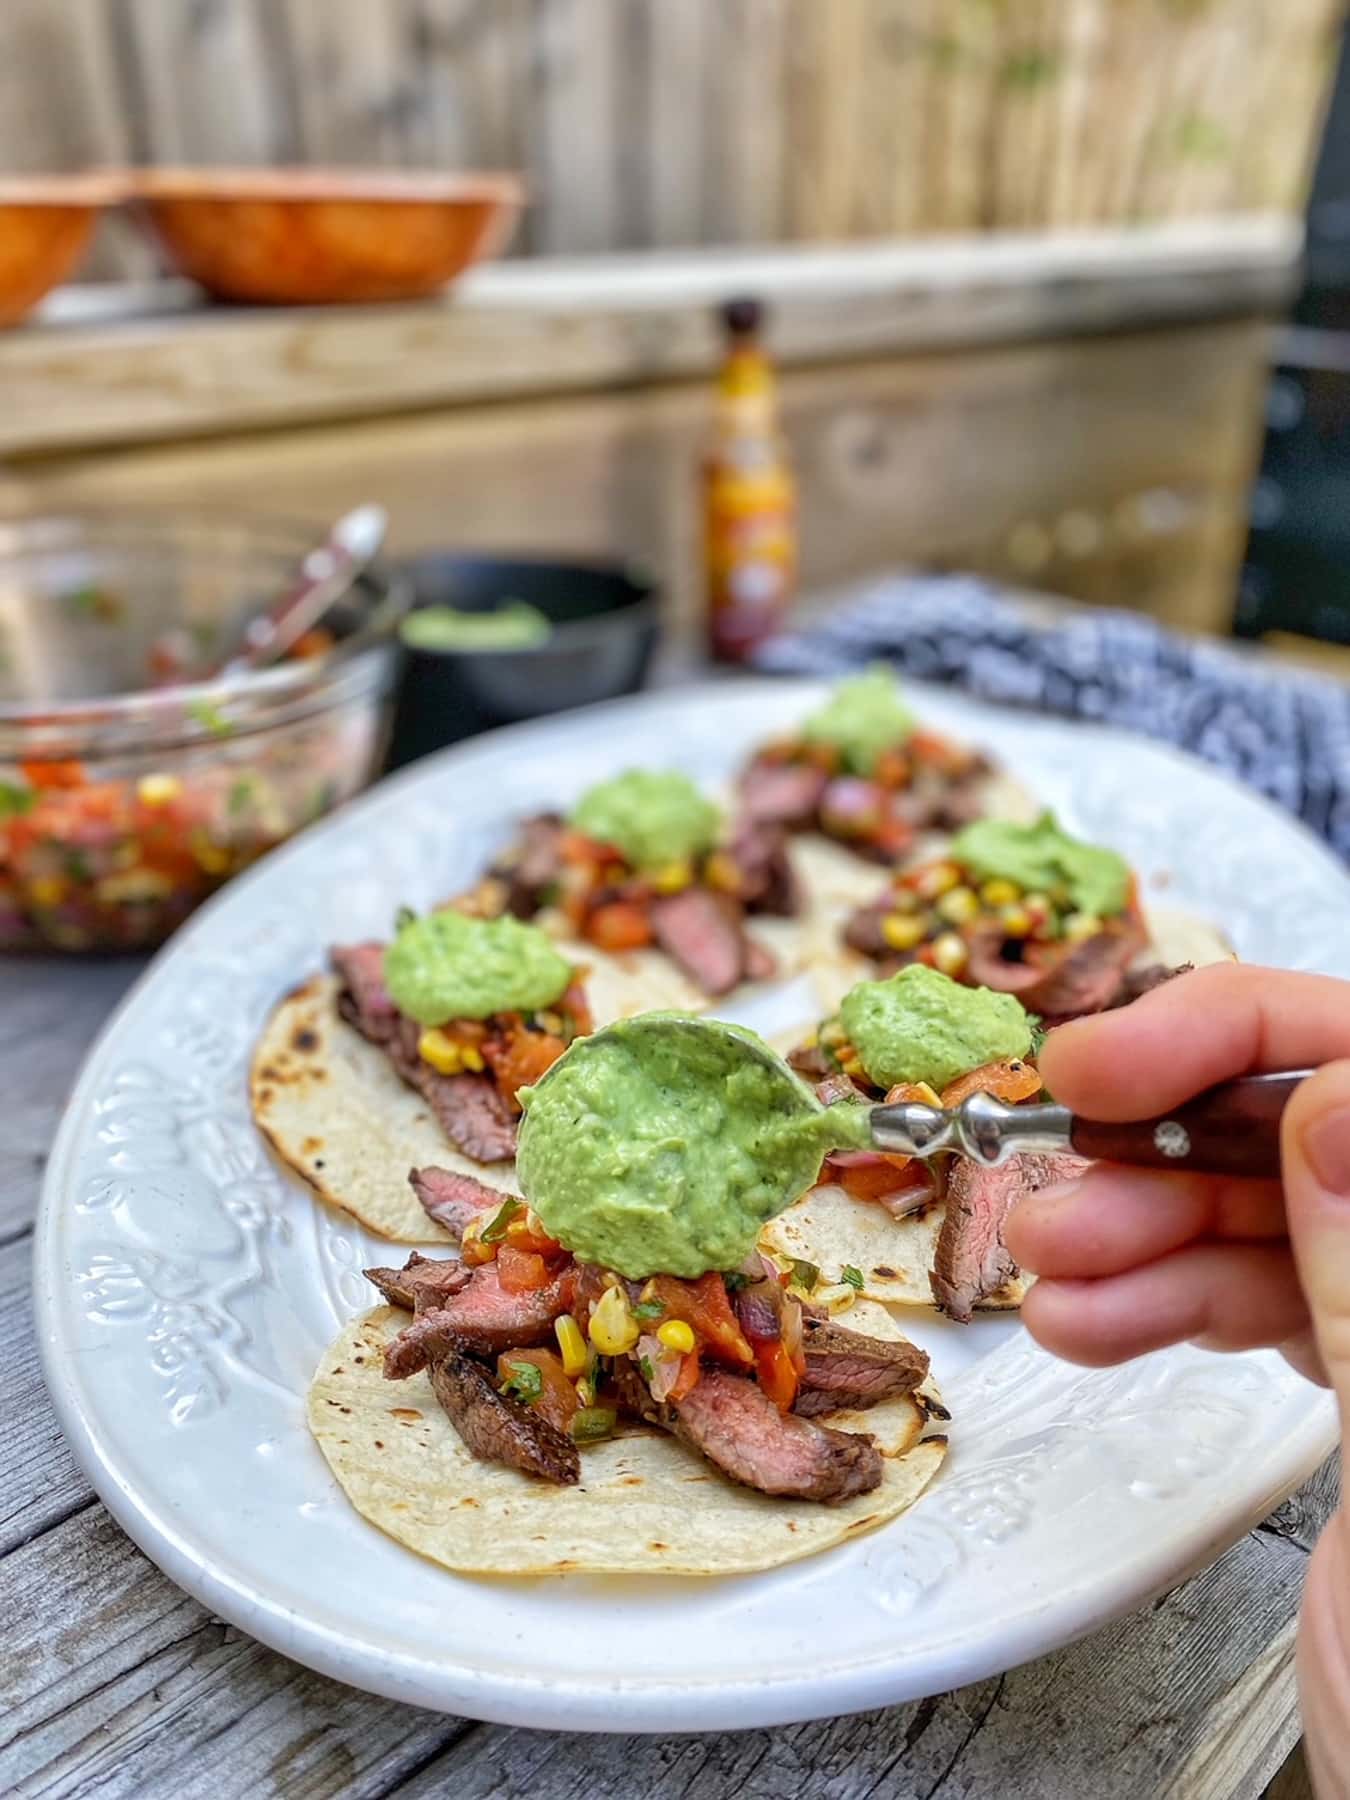 Adding the Avocado Crema to the Flank Steak Tacos with Grilled Salsa